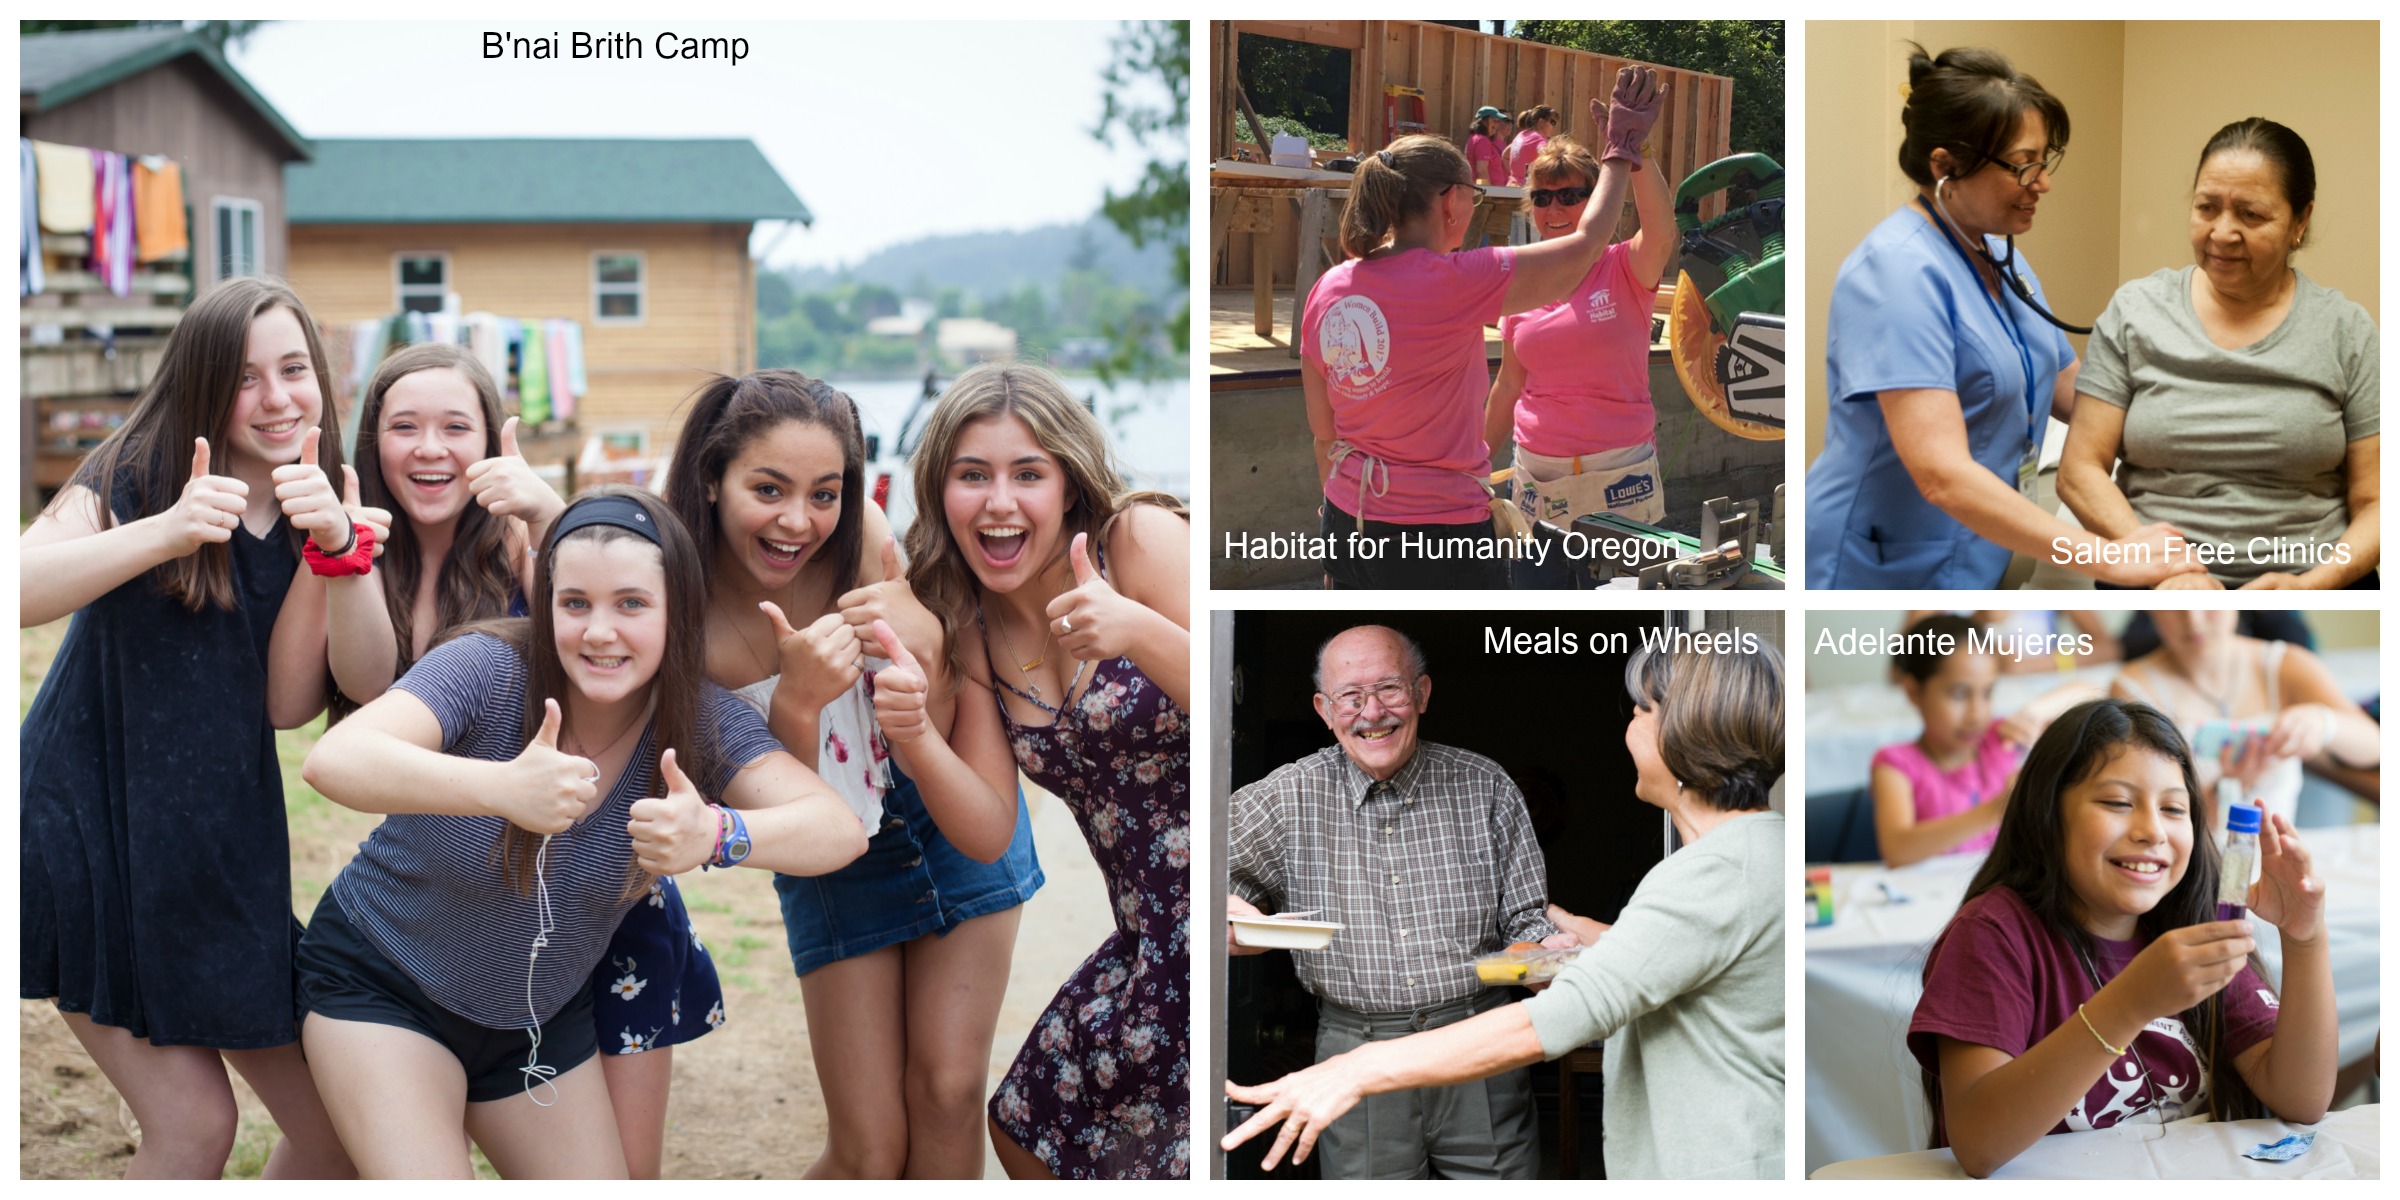 Image 1: five teenage girls smile and show thumbs up for the camera while outside. Text overlay says "B'nai Brith Camp." Image 2: two women wearing pink t-shirts give each other a high five on a construction site. Text overlay says "Habitat for Humanity Oregon." Image 3: a man with a gray mustache wearing glasses and a gray checkered shirt smiles while holding two plates of food, with a woman wearing a green sweater standing nearby. Text overlay says "Meals on Wheels." Image 4: a woman with dark straight hair wearing a green shirt sits next to a nurse with dark straight hair wearing blue scrubs. Text overlay says "Salem Free Clinics." Image 4: a young girl with long, straight, dark hair wearing a maroon t-shirt smiles while looking at a small vile with purple liquid in it. Text overlay says "Adelante Mujeres."